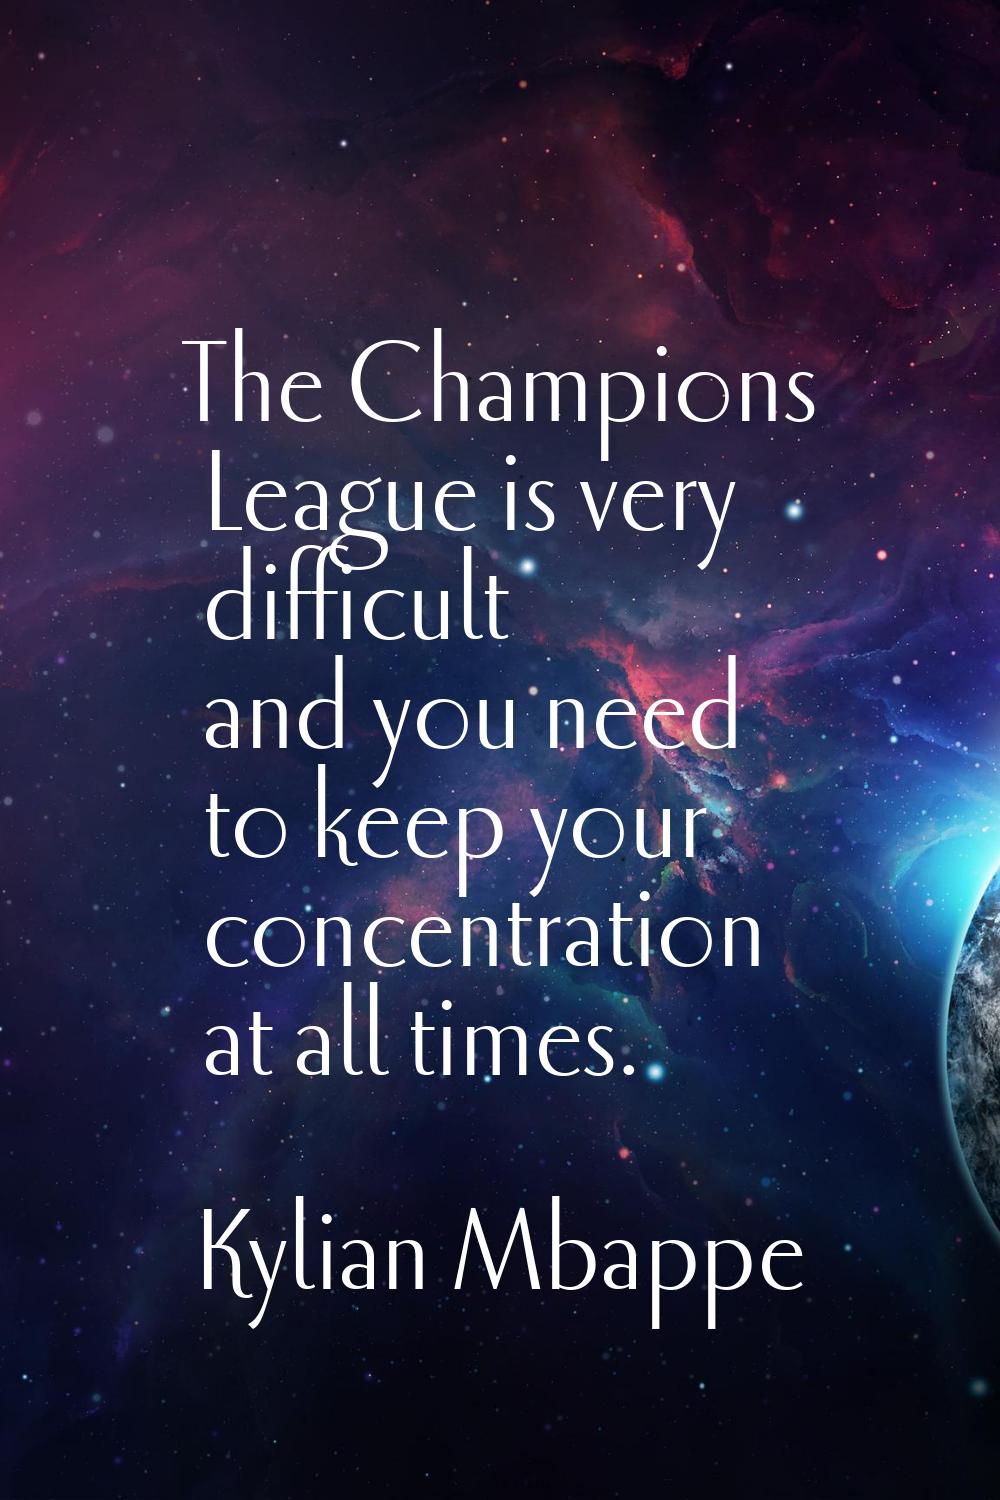 The Champions League is very difficult and you need to keep your concentration at all times.